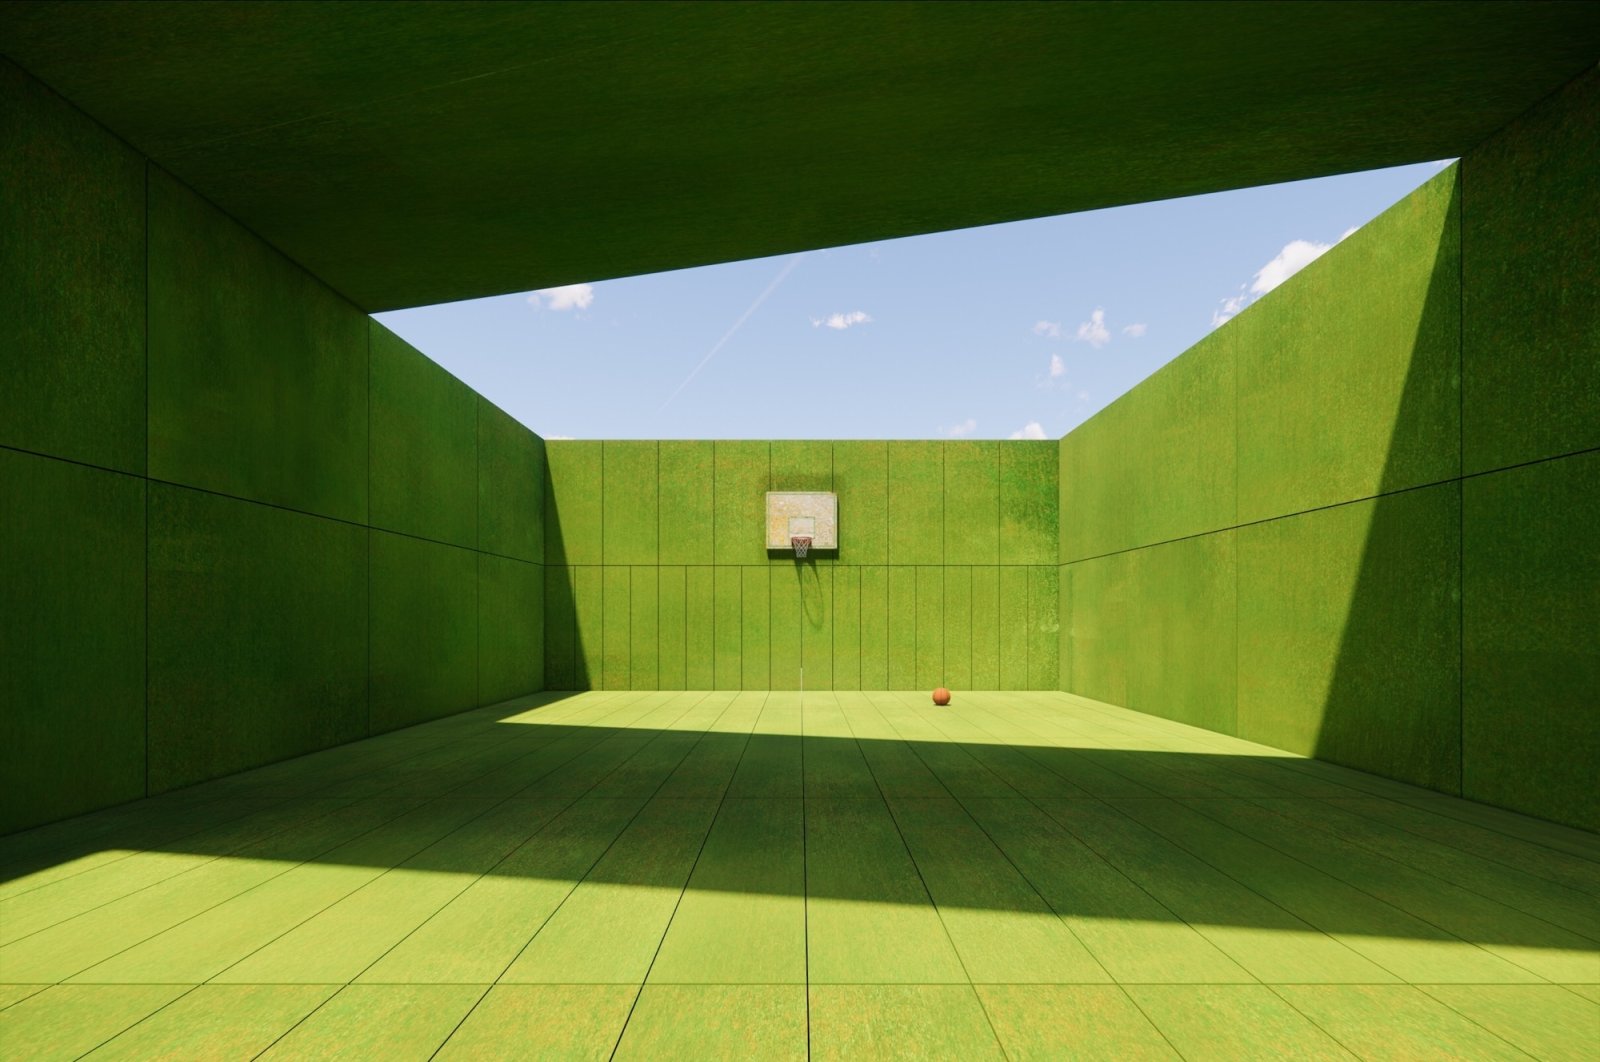 &quot;EXIT 001: Green Suede Walls for the Basketball Court,&quot; a typical setting for a basketball court with green suede balls. A ball sits in the middle of the court reminiscent of a solo game. The court has its own rules. (Photo courtesy of Ceren Arslan)